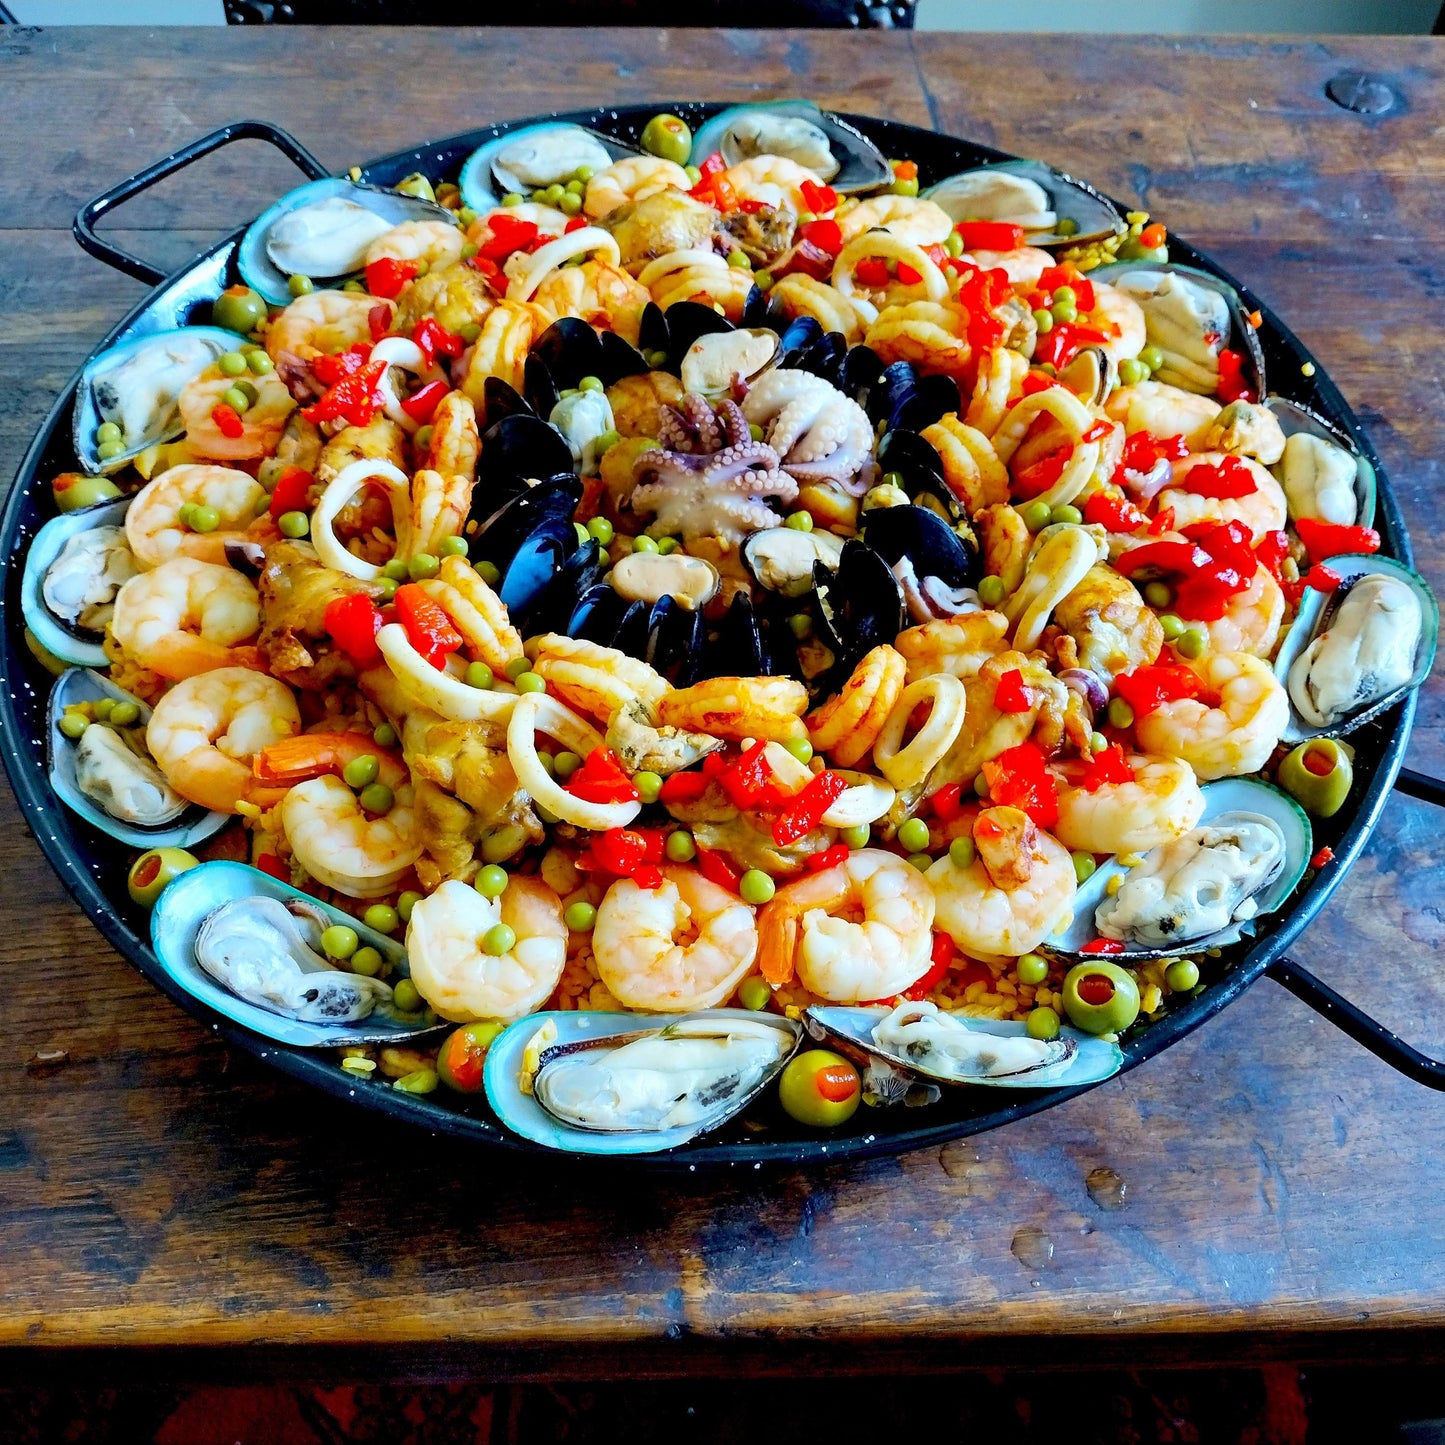 New Zealand green mussels, baby octopus, scallops, shrimp, calamari, chicken and chorizo paella for 12 guests.